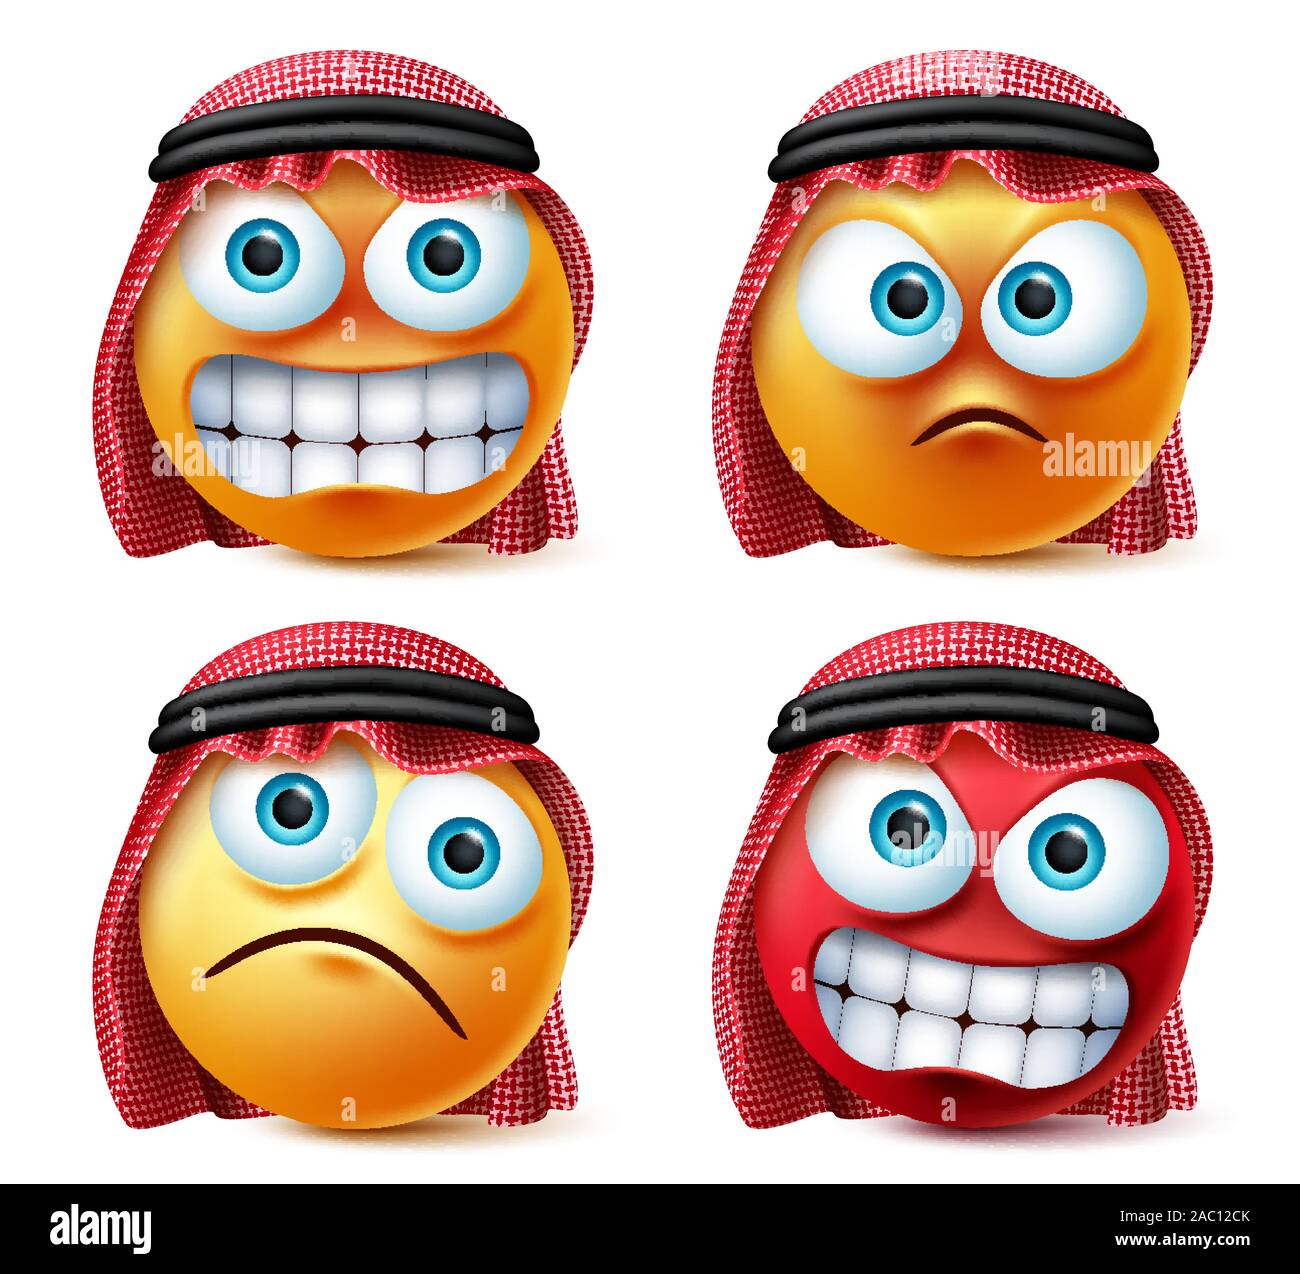 Angry saudi arab smiley emoji and emoticon vector set. Emoticons of saudi arabian wearing thawb in angry, stress and crazy mood isolated. Stock Vector